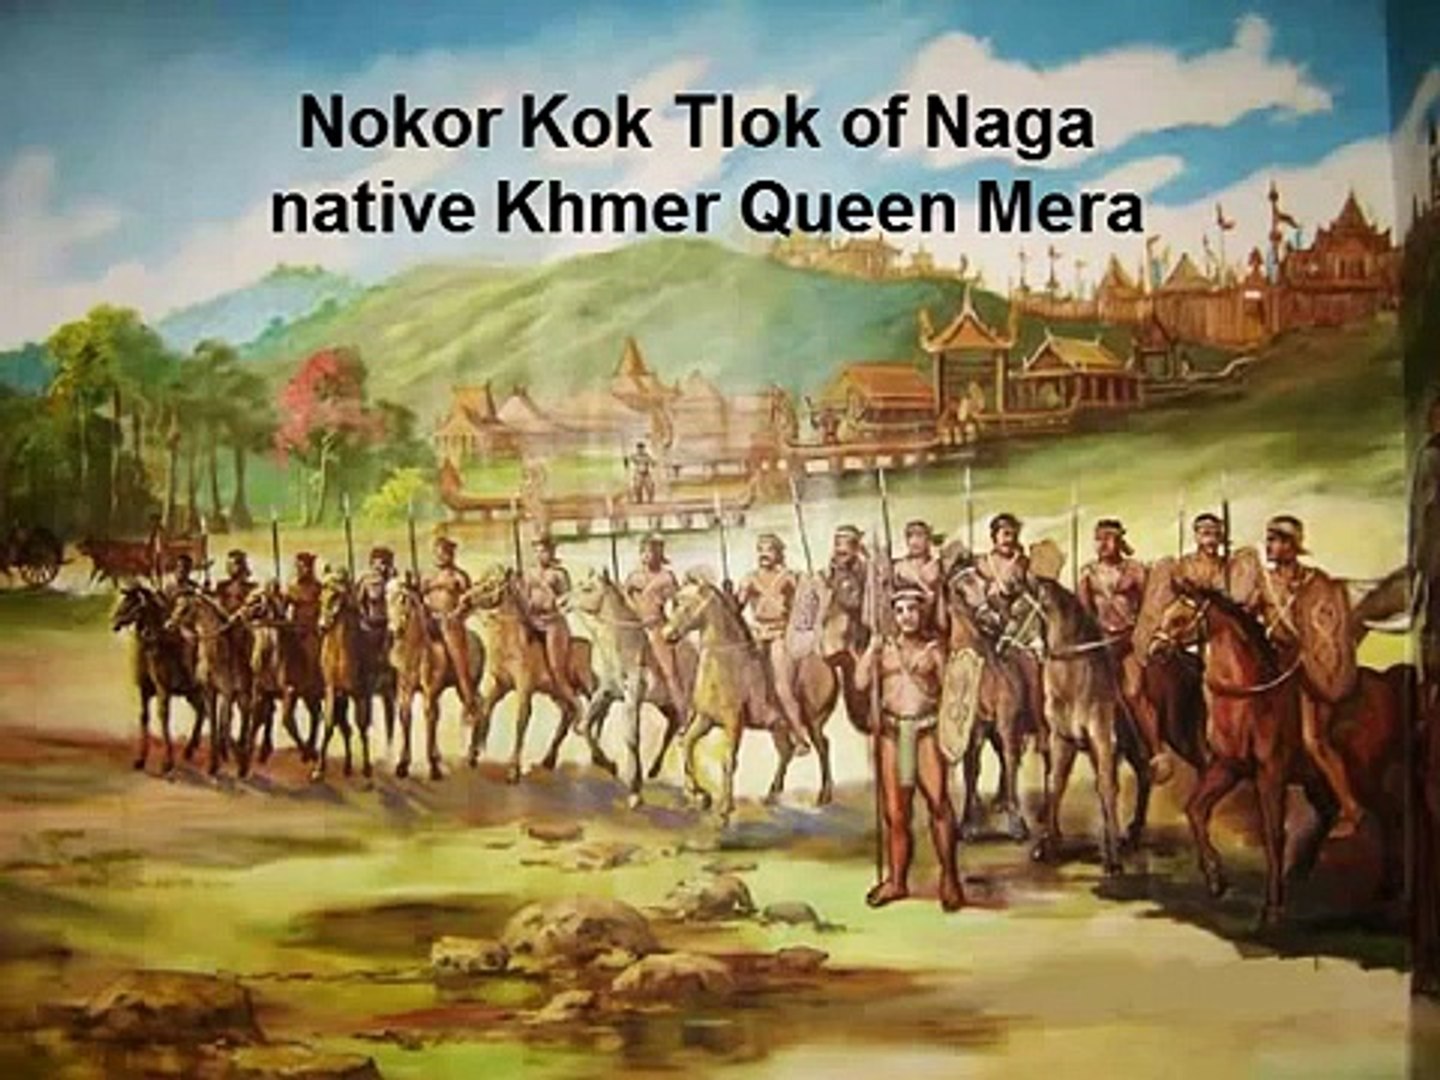 KHMER PEOPLE LIFE STYLE MAKES KHMER CIVILIZATION NOT HISTORICAL AFRICAN INFLUENCE!!!